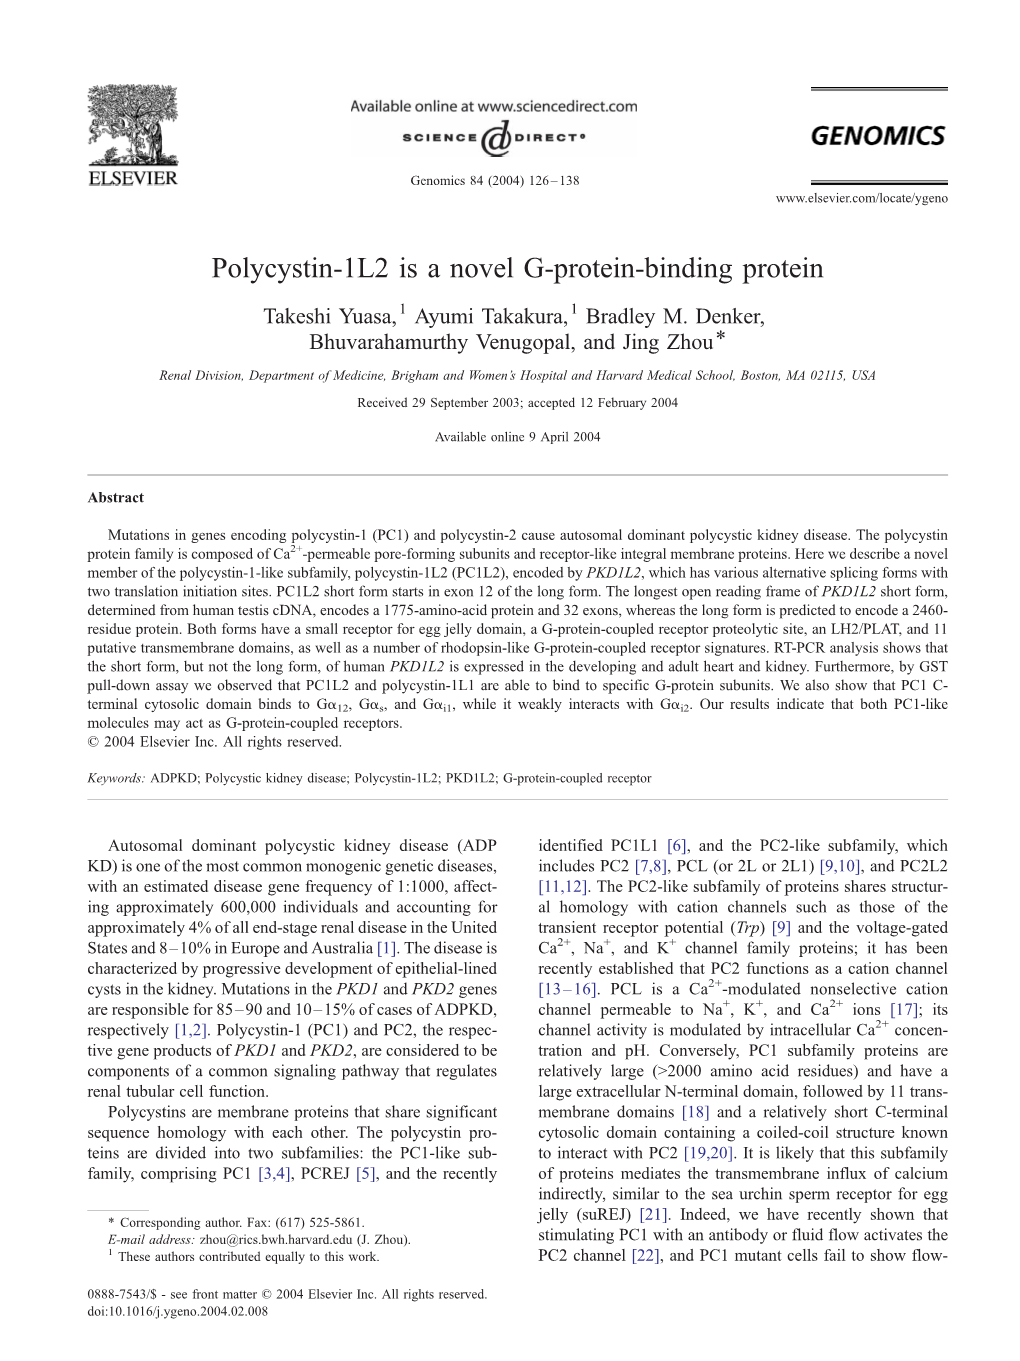 Polycystin-1L2 Is a Novel G-Protein-Binding Protein